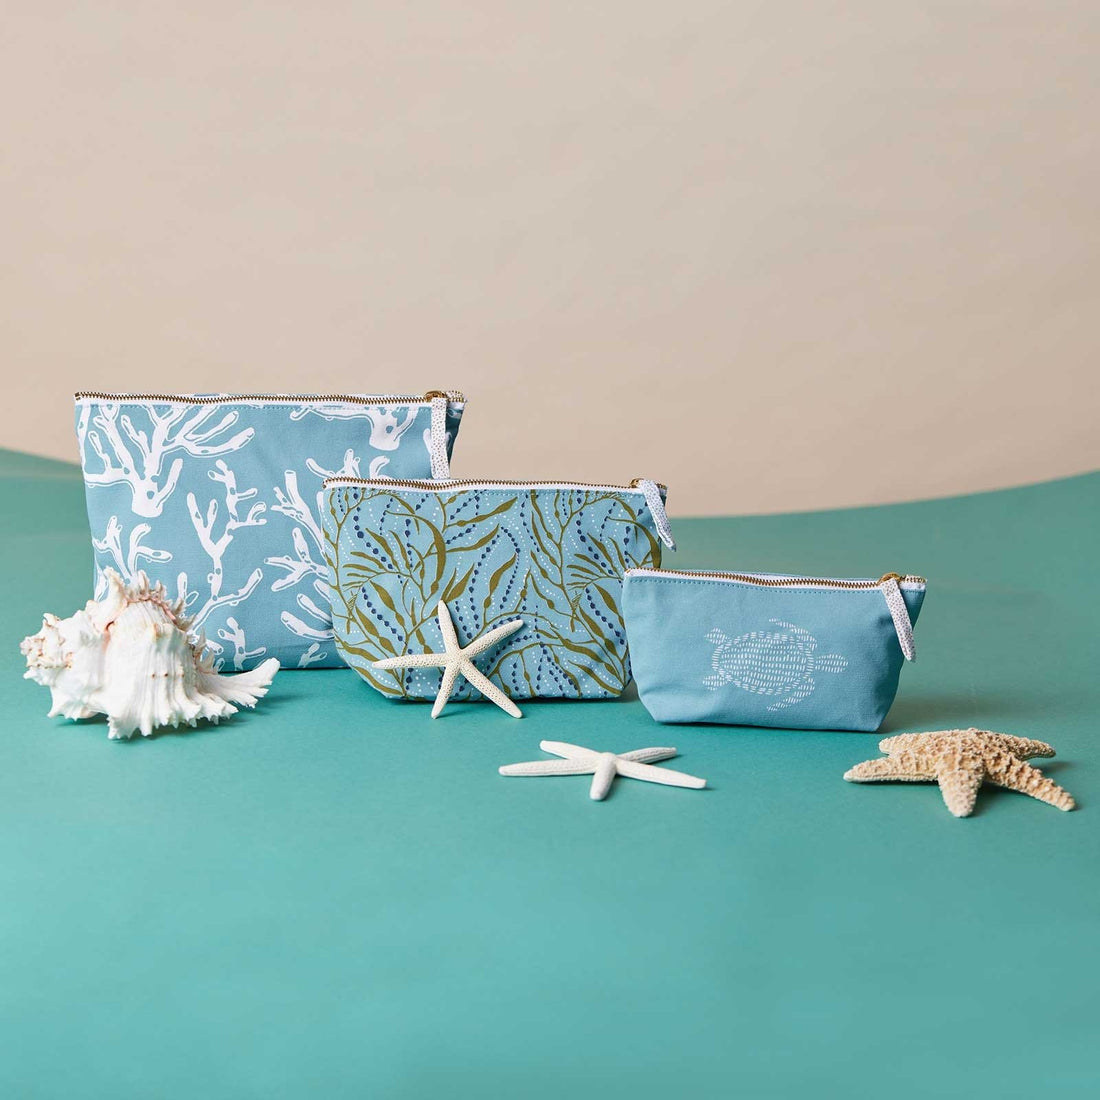 Cerulean Sea Coral Large Relaxed Pouch Pouch - rockflowerpaper